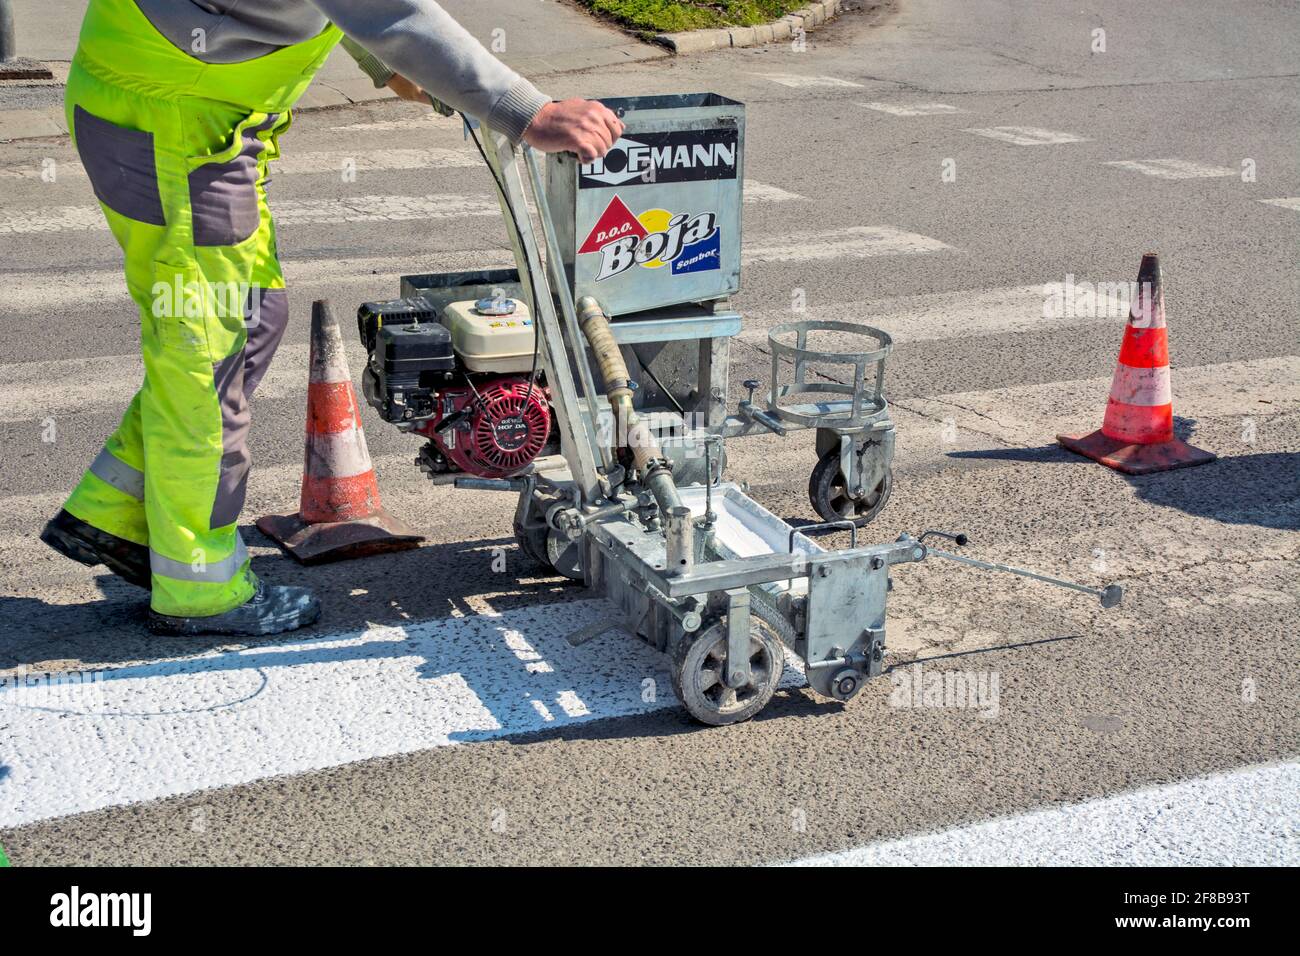 Zrenjanin, Serbia, March 26, 2021. Workers of a company that paints pedestrian crossings, popularly called 'zebras', mark and paint on asphalt. Stock Photo